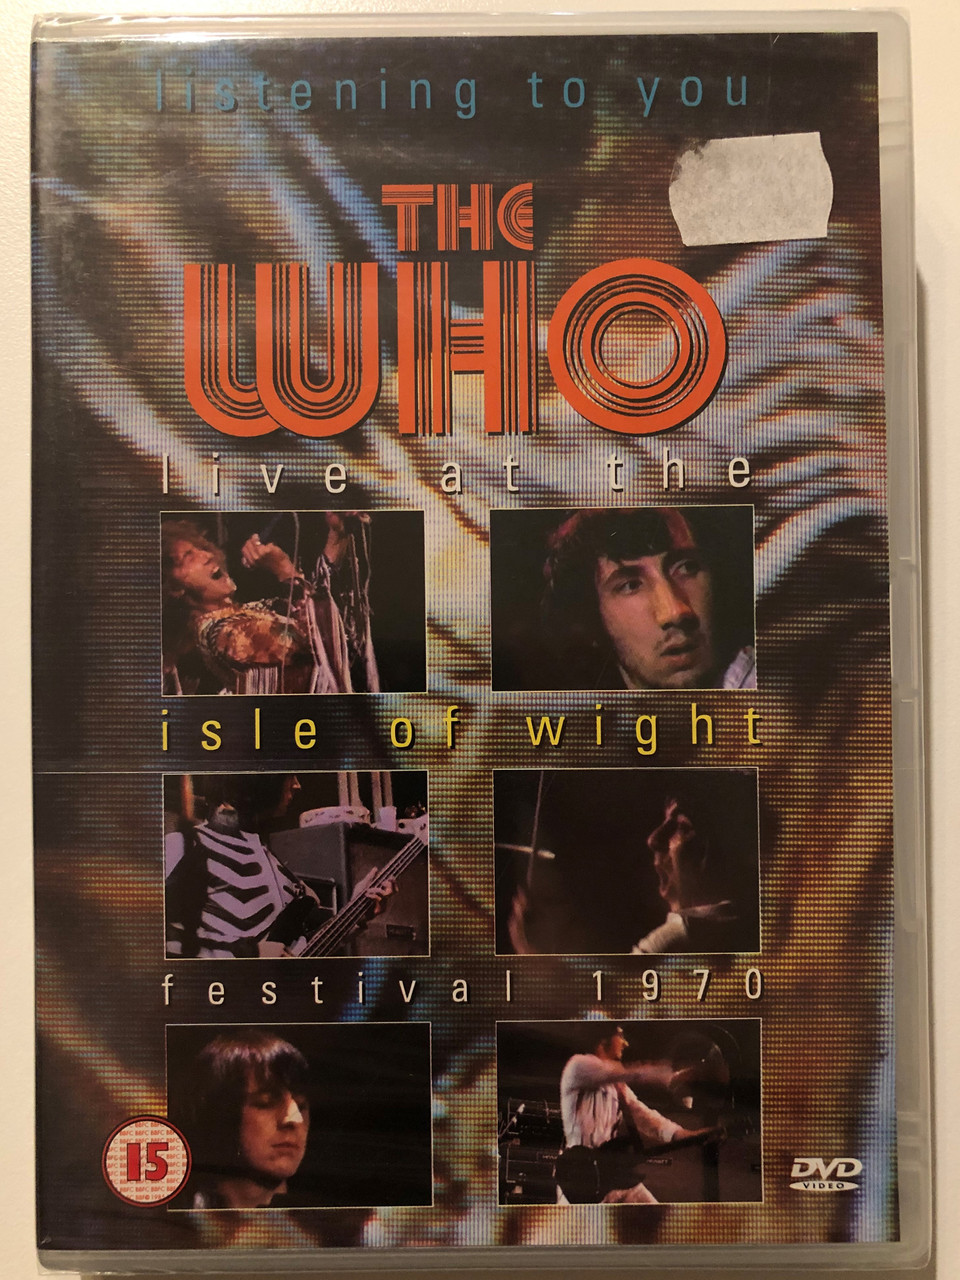 Listening_to_You_The_Who_at_the_Isle_of_Wight_UK_Warner_Music_0630-14360-2._Released_June_26_2000_Director_Murray_Lerner_Executive_producer_Bill_Curbishley_DVD_2__51063.1692099531.1280.1280.JPG (960×1280)